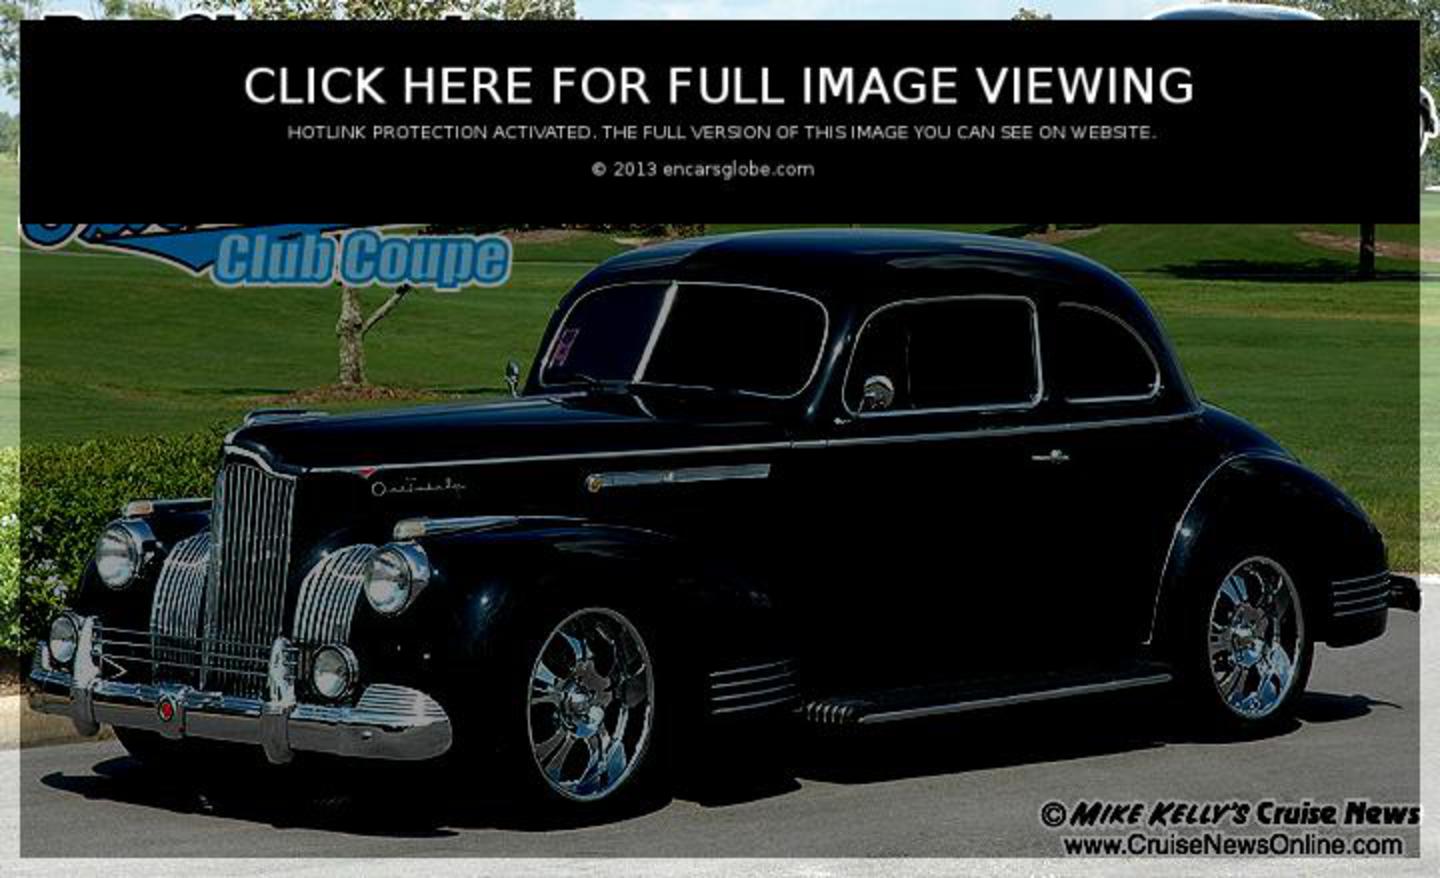 Packard Six club coupe Photo Gallery: Photo #01 out of 11, Image ...